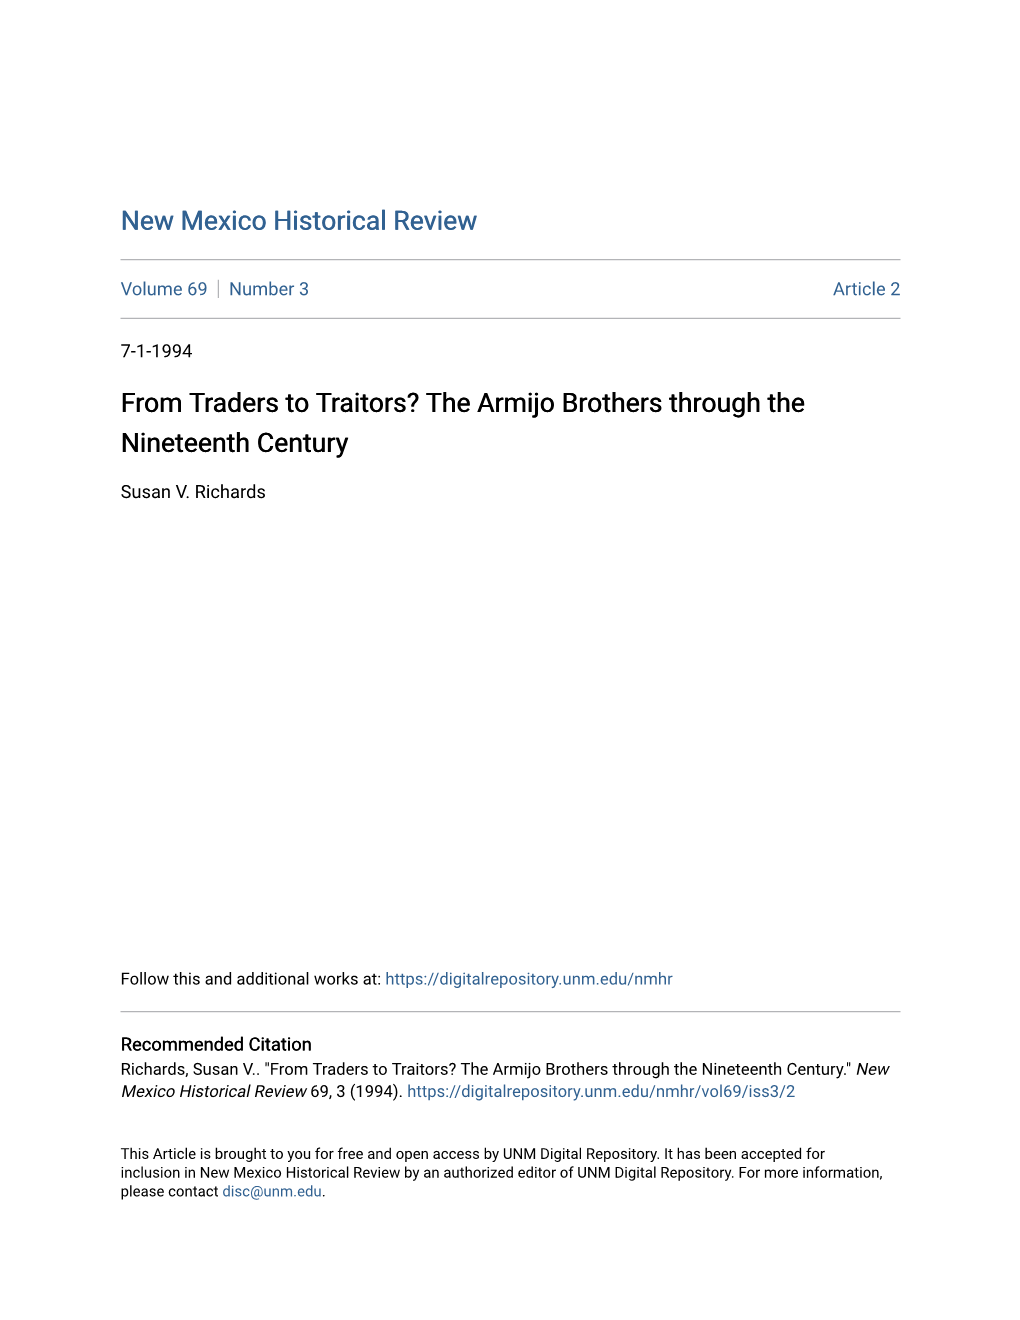 The Armijo Brothers Through the Nineteenth Century